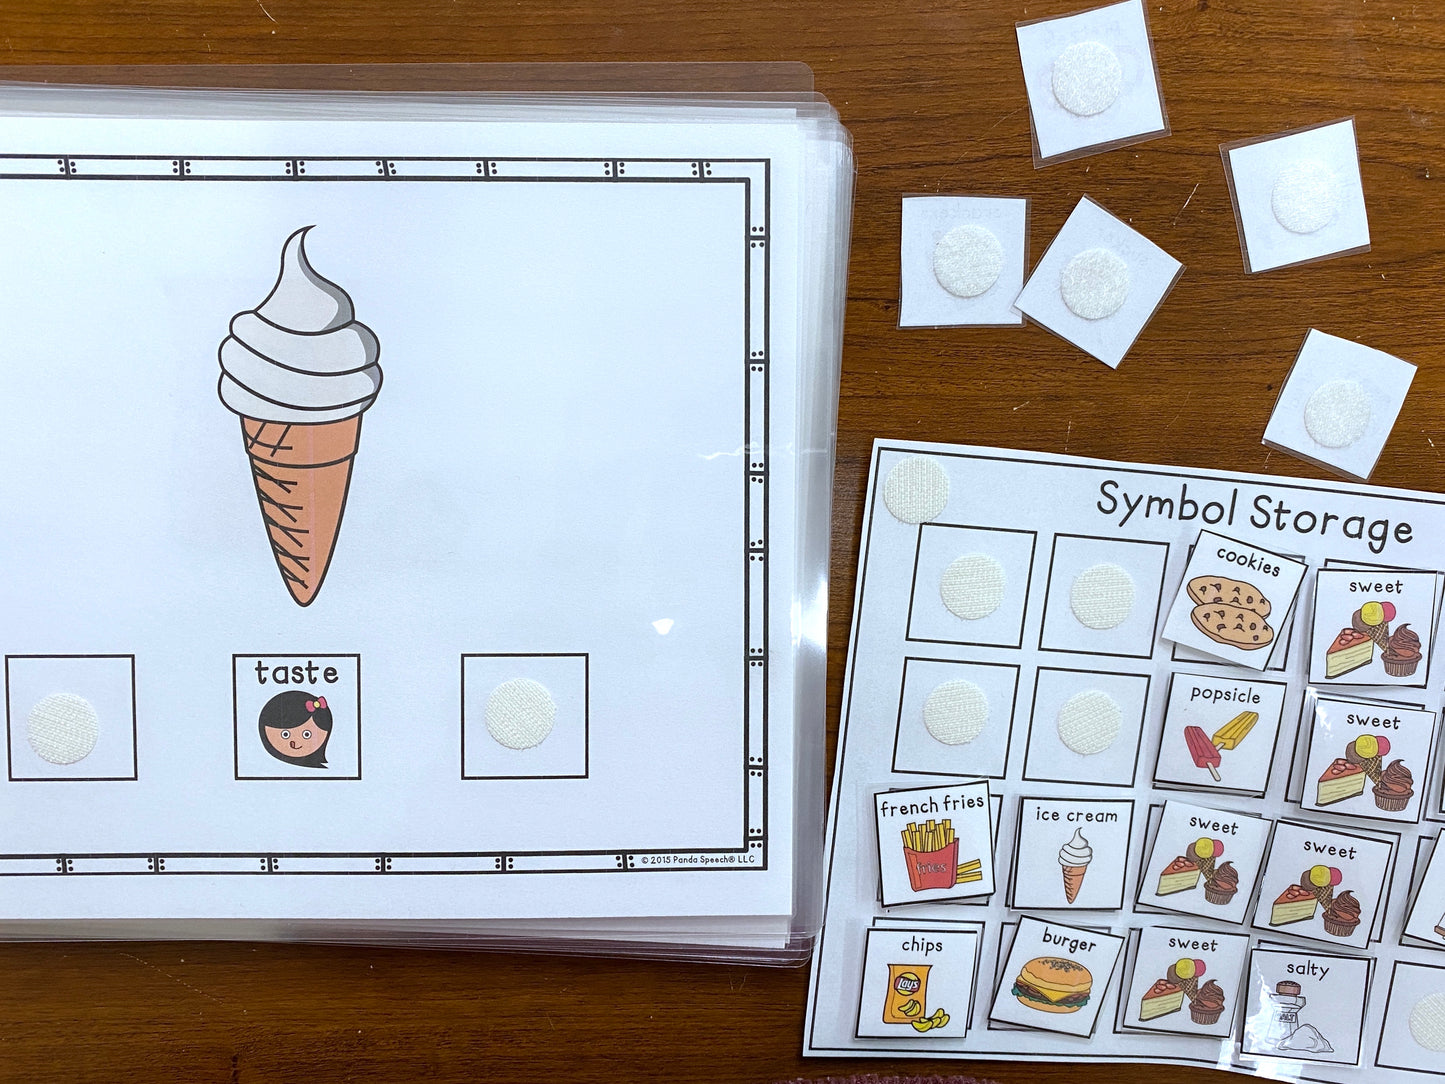 Functional Vocabulary Book: Sweet or Salty?  Print & Make Book